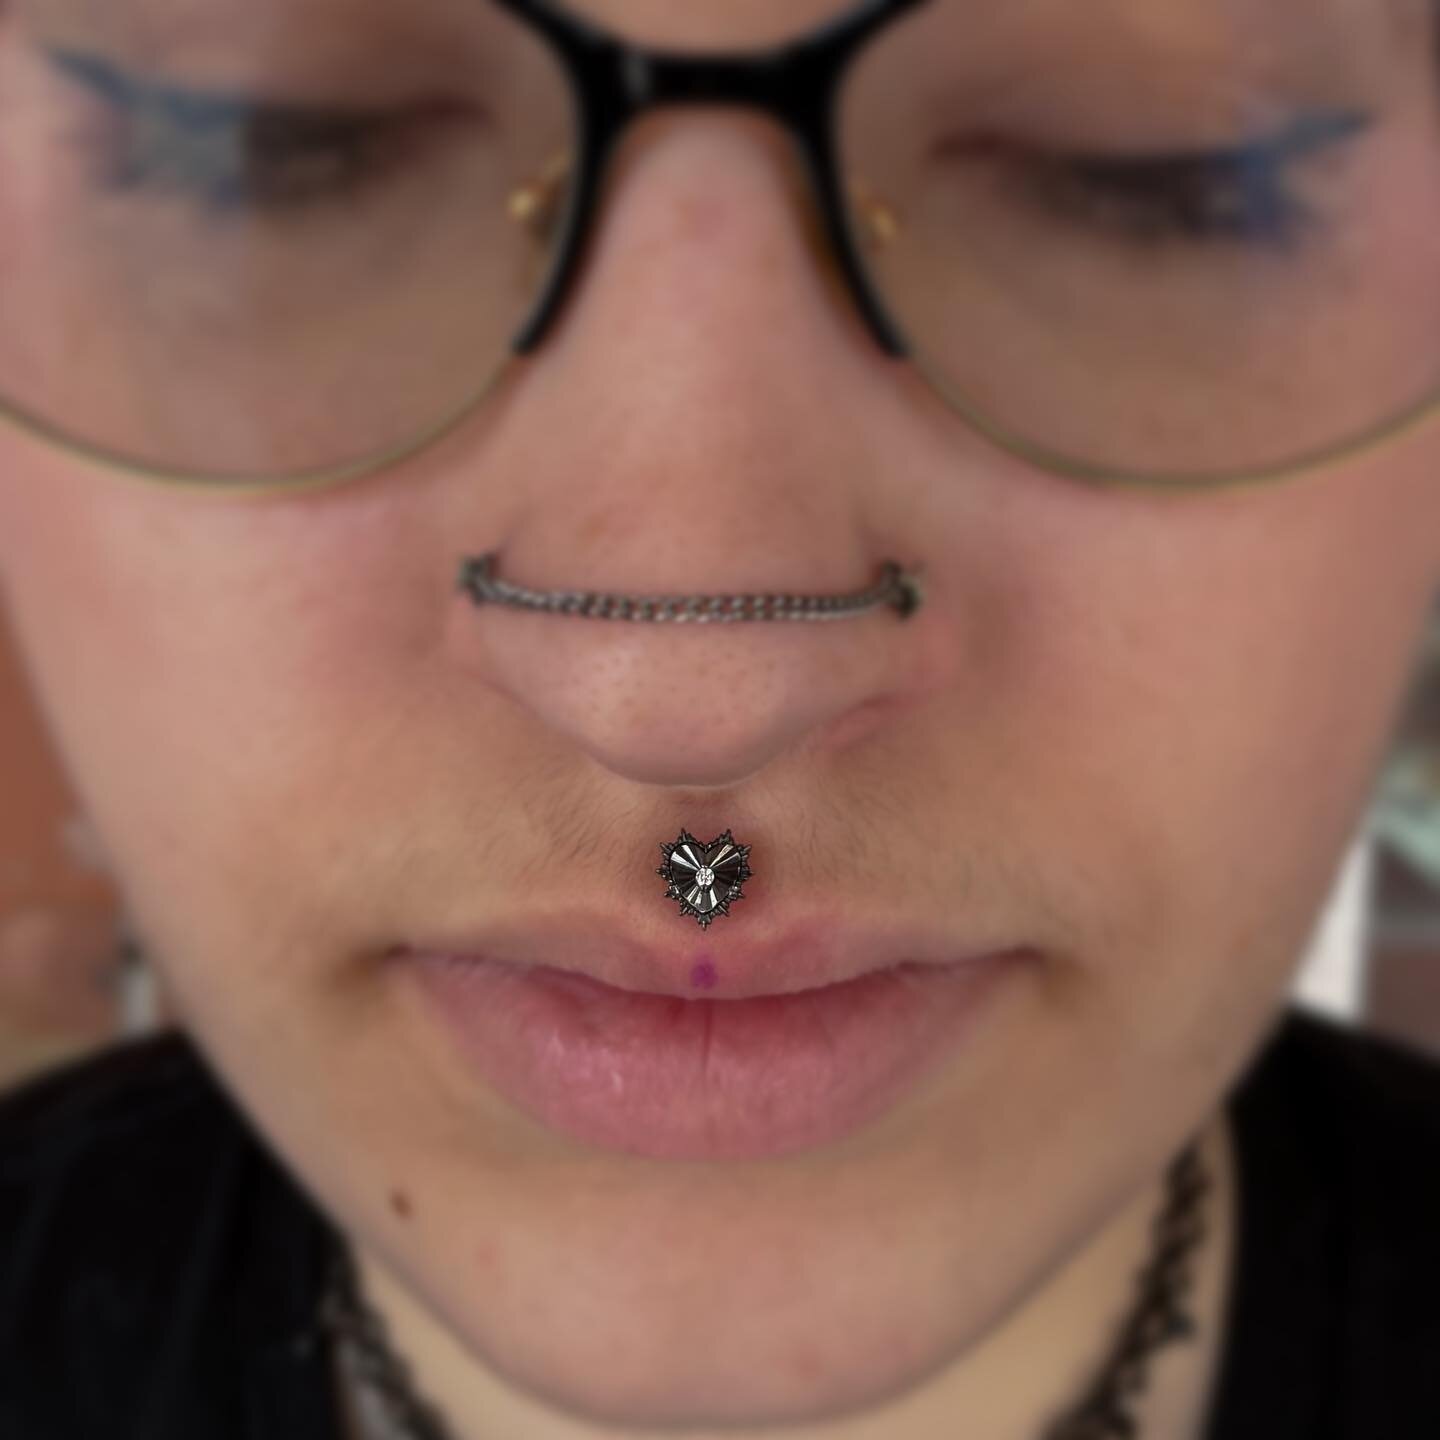 One of our tattoo artists💕 @maddymaitattoo 💕 let me do her philtrum on Sunday with a Bad Romance from @buddhajewelryofficial in rhodium